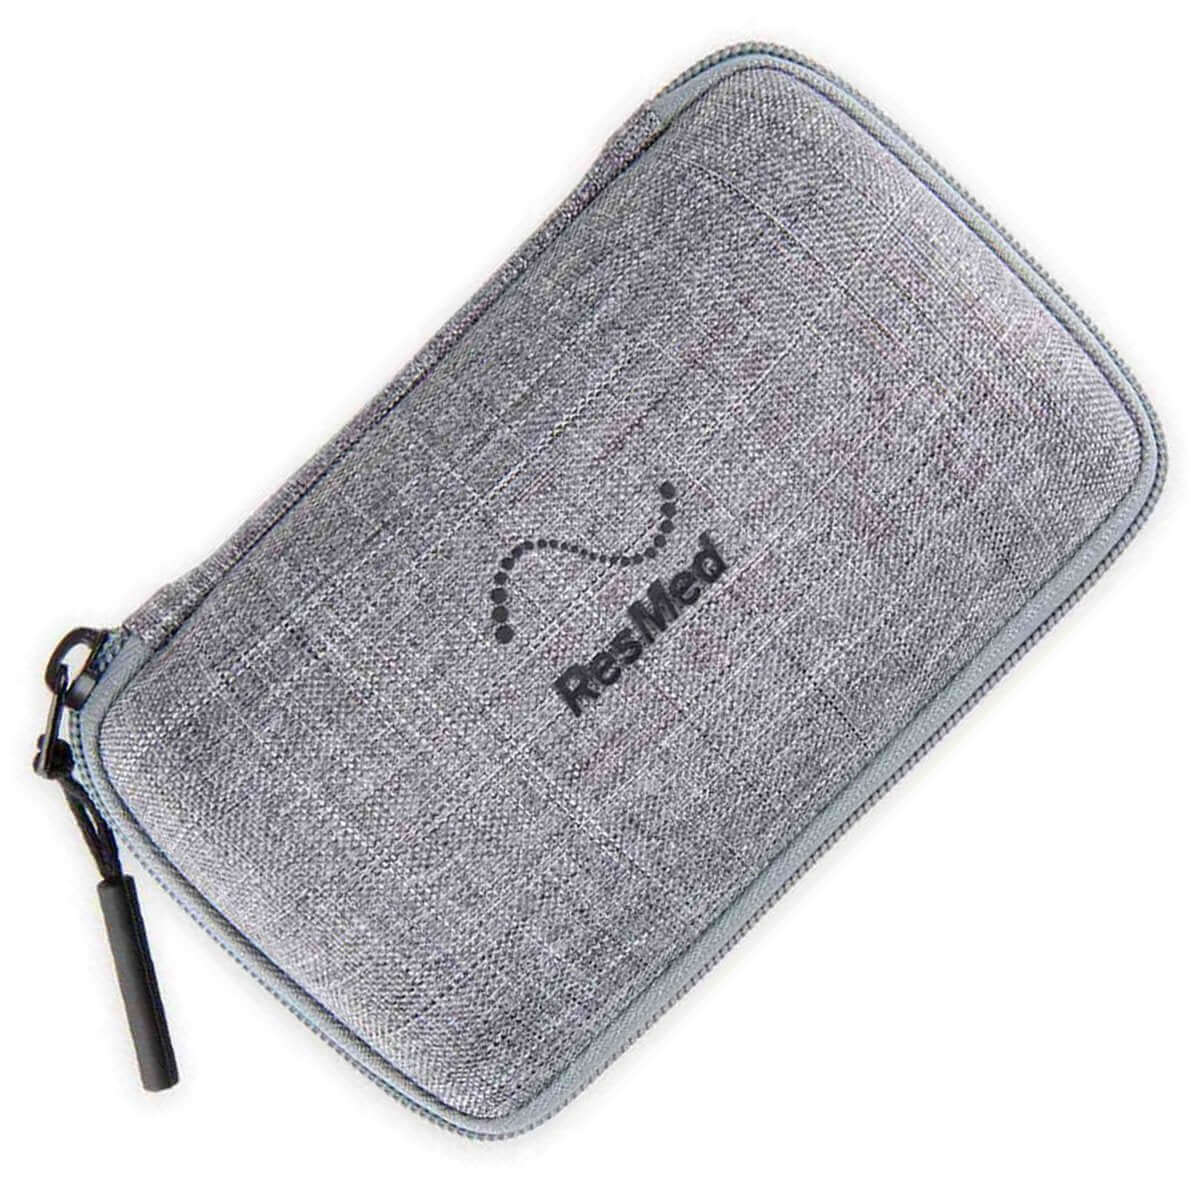 Compact Travel Case for AirMini CPAP Machines